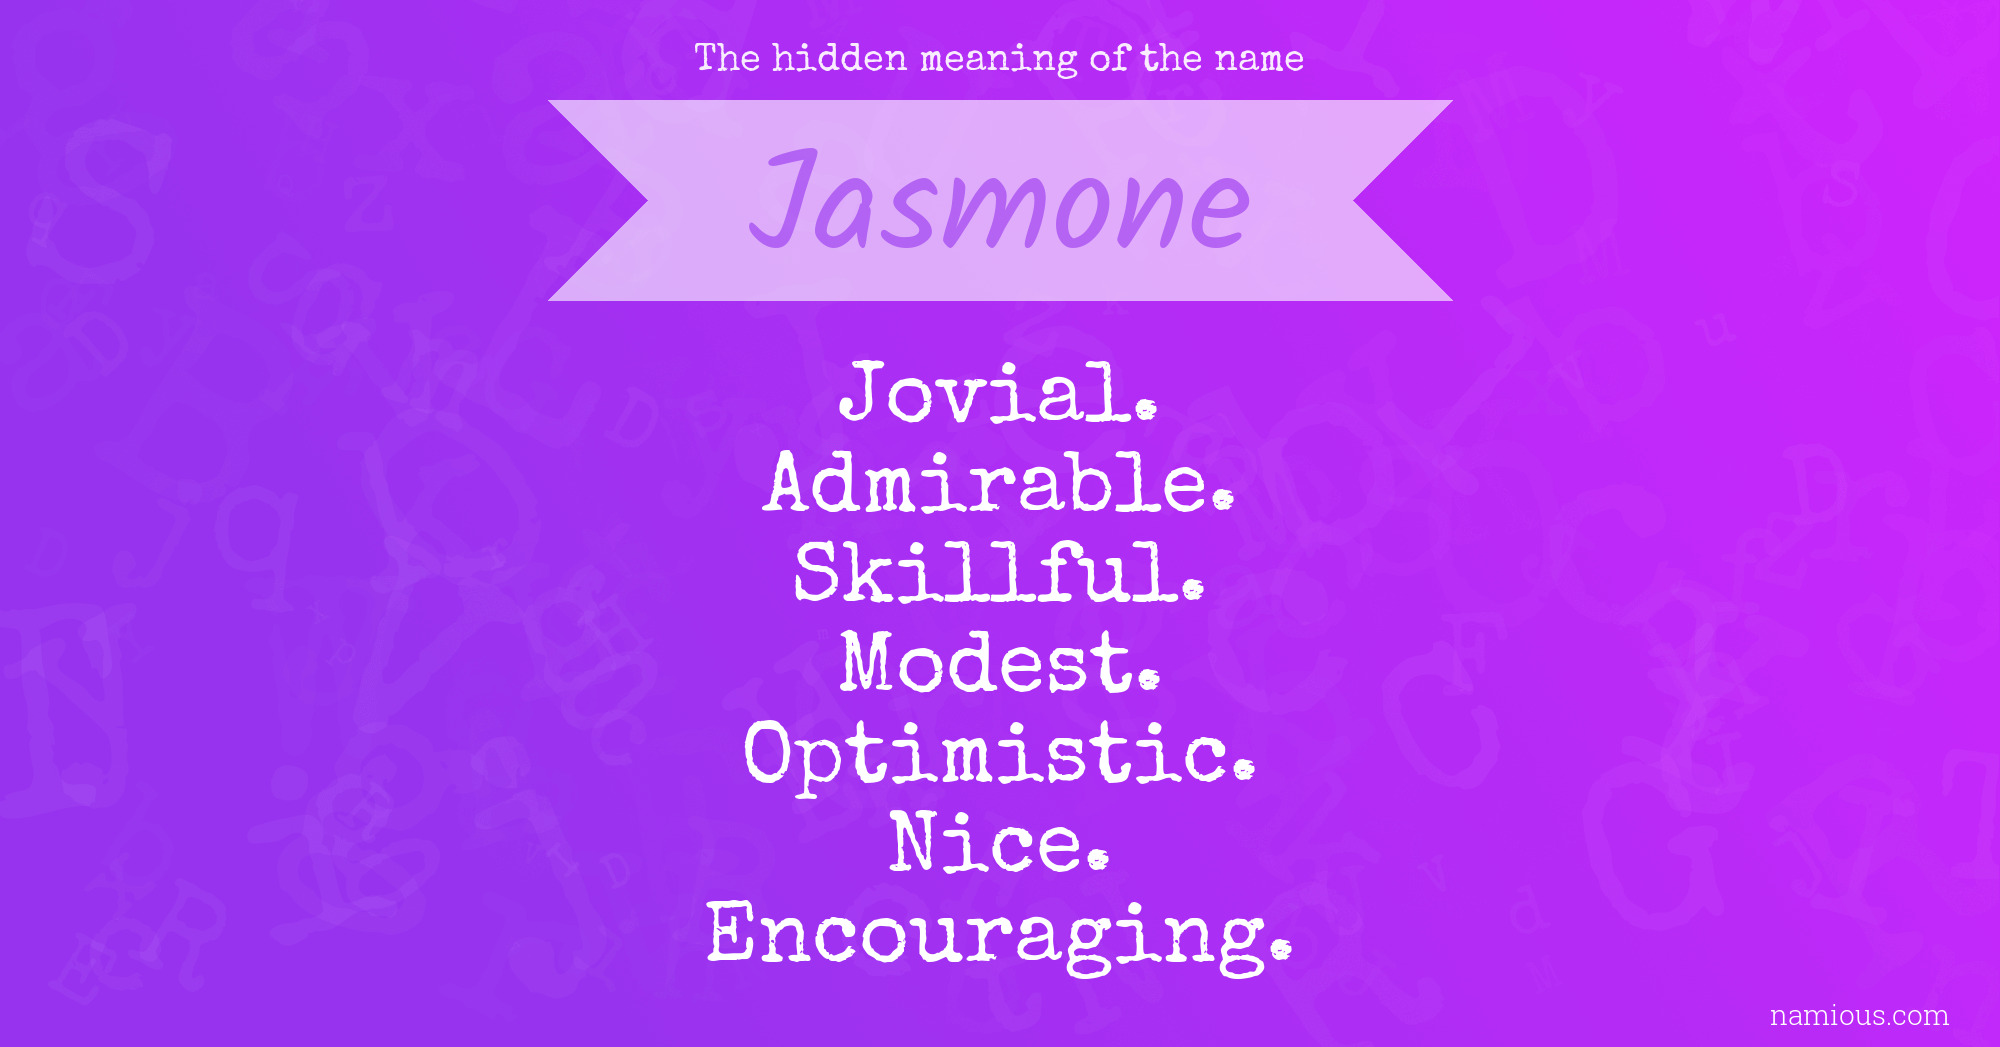 The hidden meaning of the name Jasmone